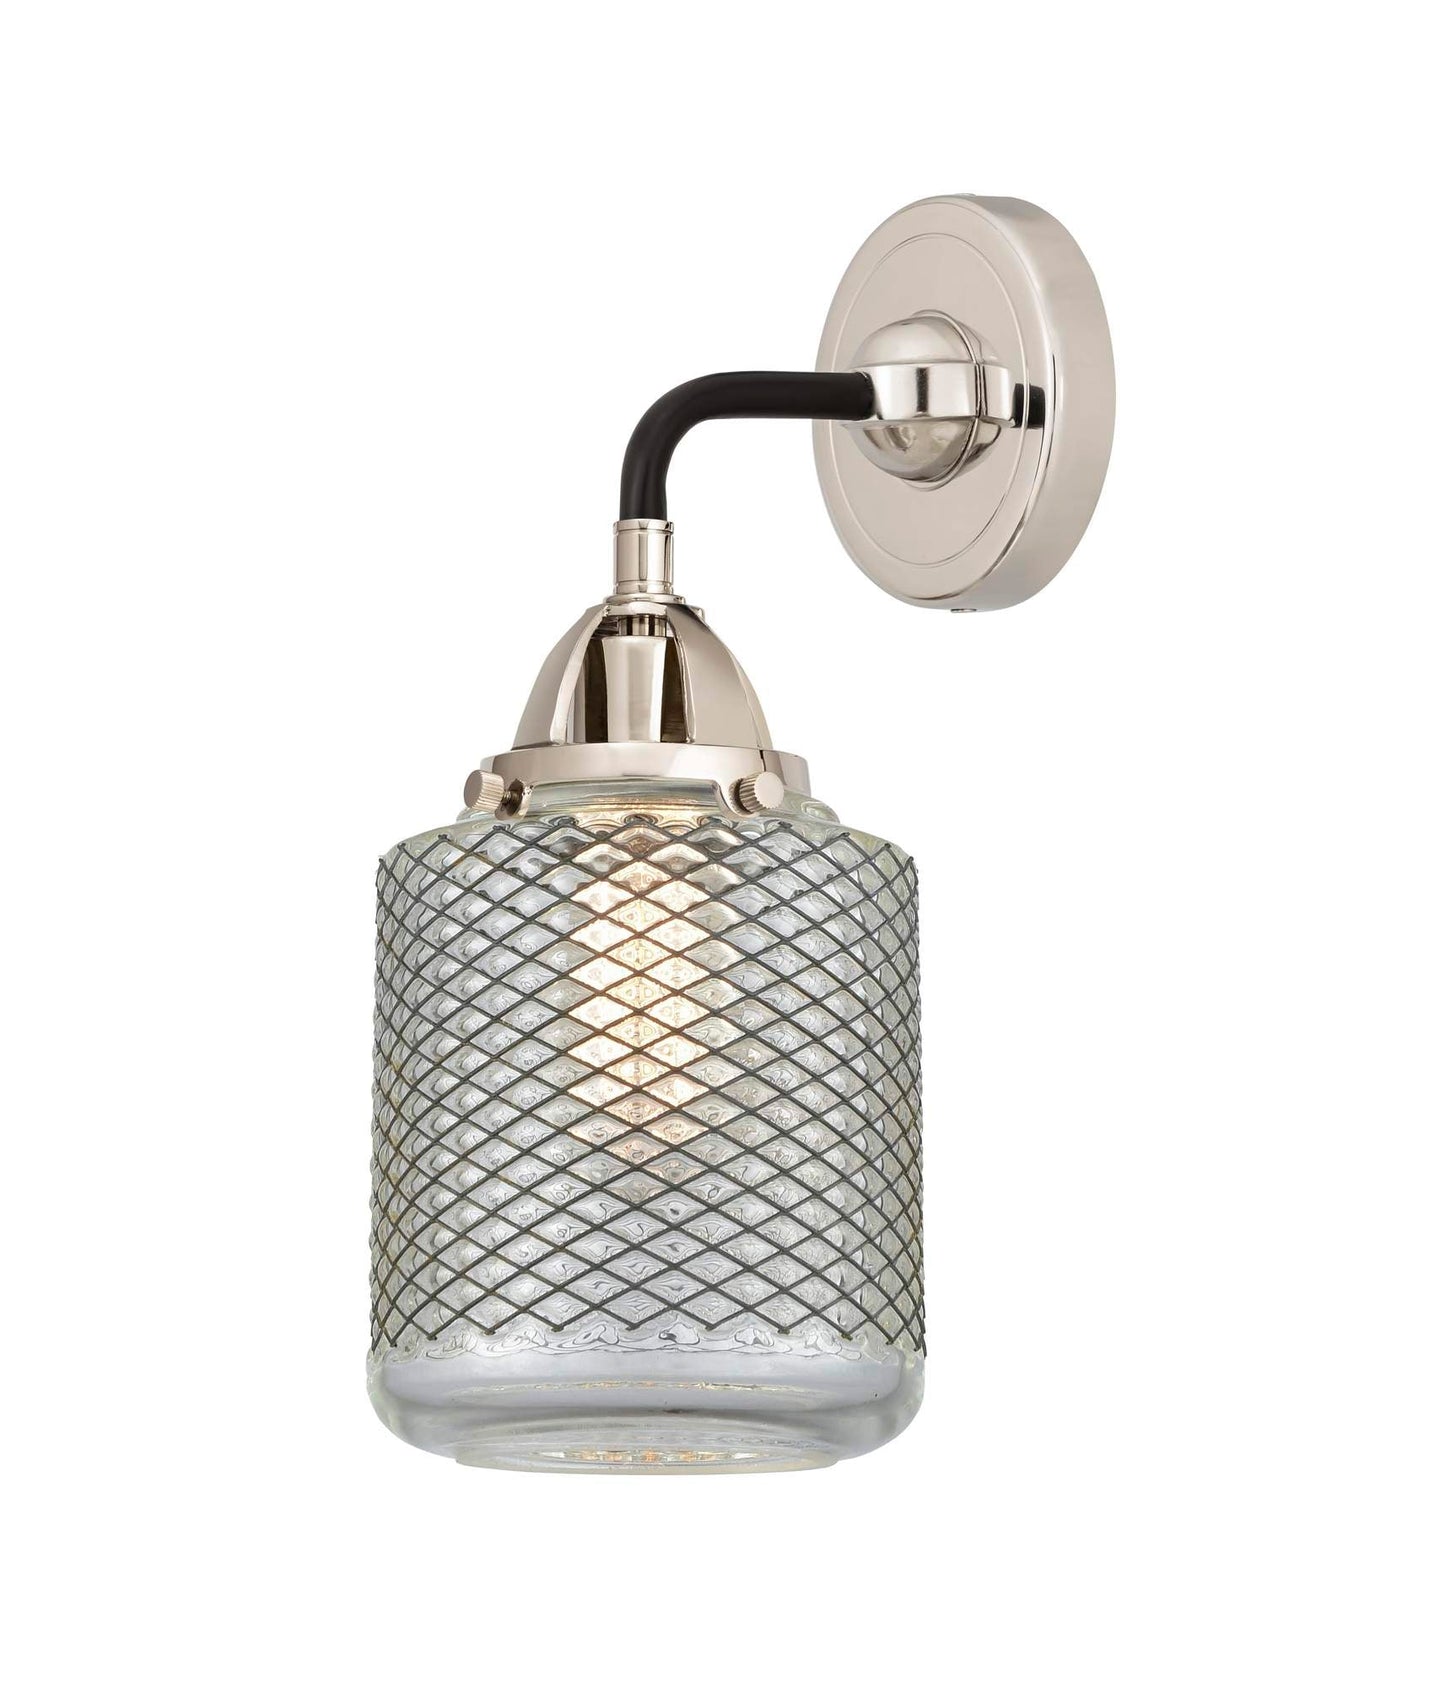 288-1W-BPN-G262 1-Light 6" Black Polished Nickel Sconce - Vintage Wire Mesh Stanton Glass - LED Bulb - Dimmensions: 6 x 7.25 x 12.125 - Glass Up or Down: Yes